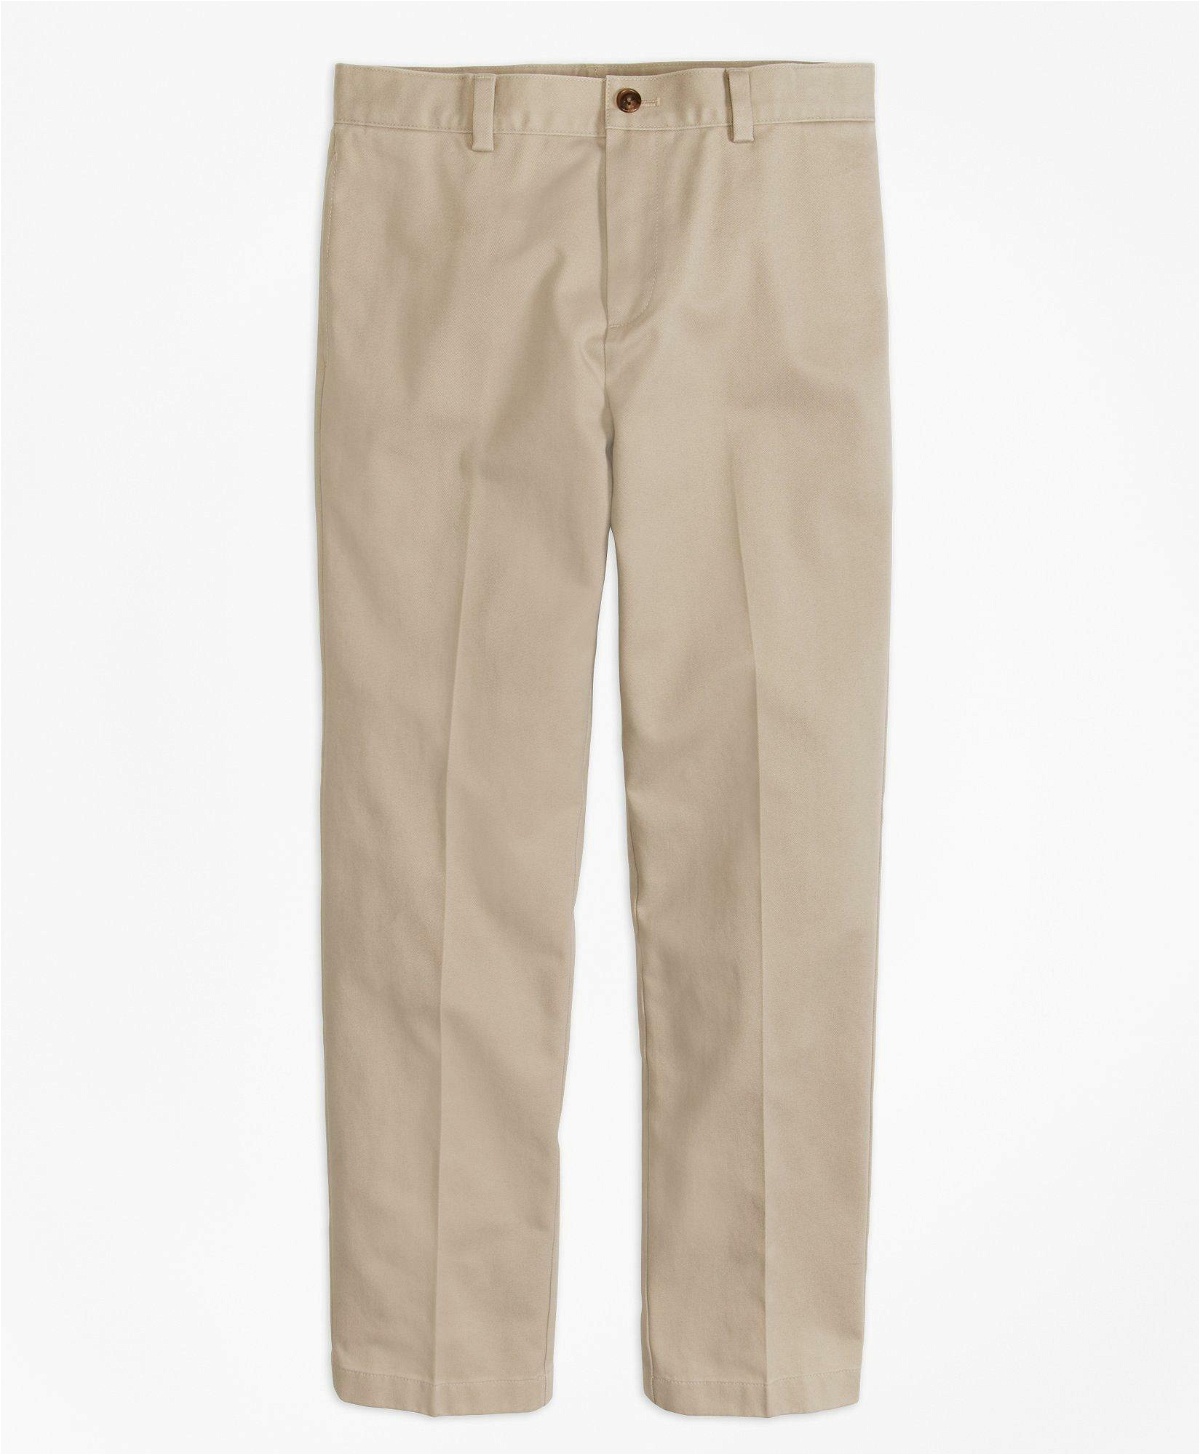 Boys' chinos designed for long legs and adventures. – Ducks and Drakes Kids